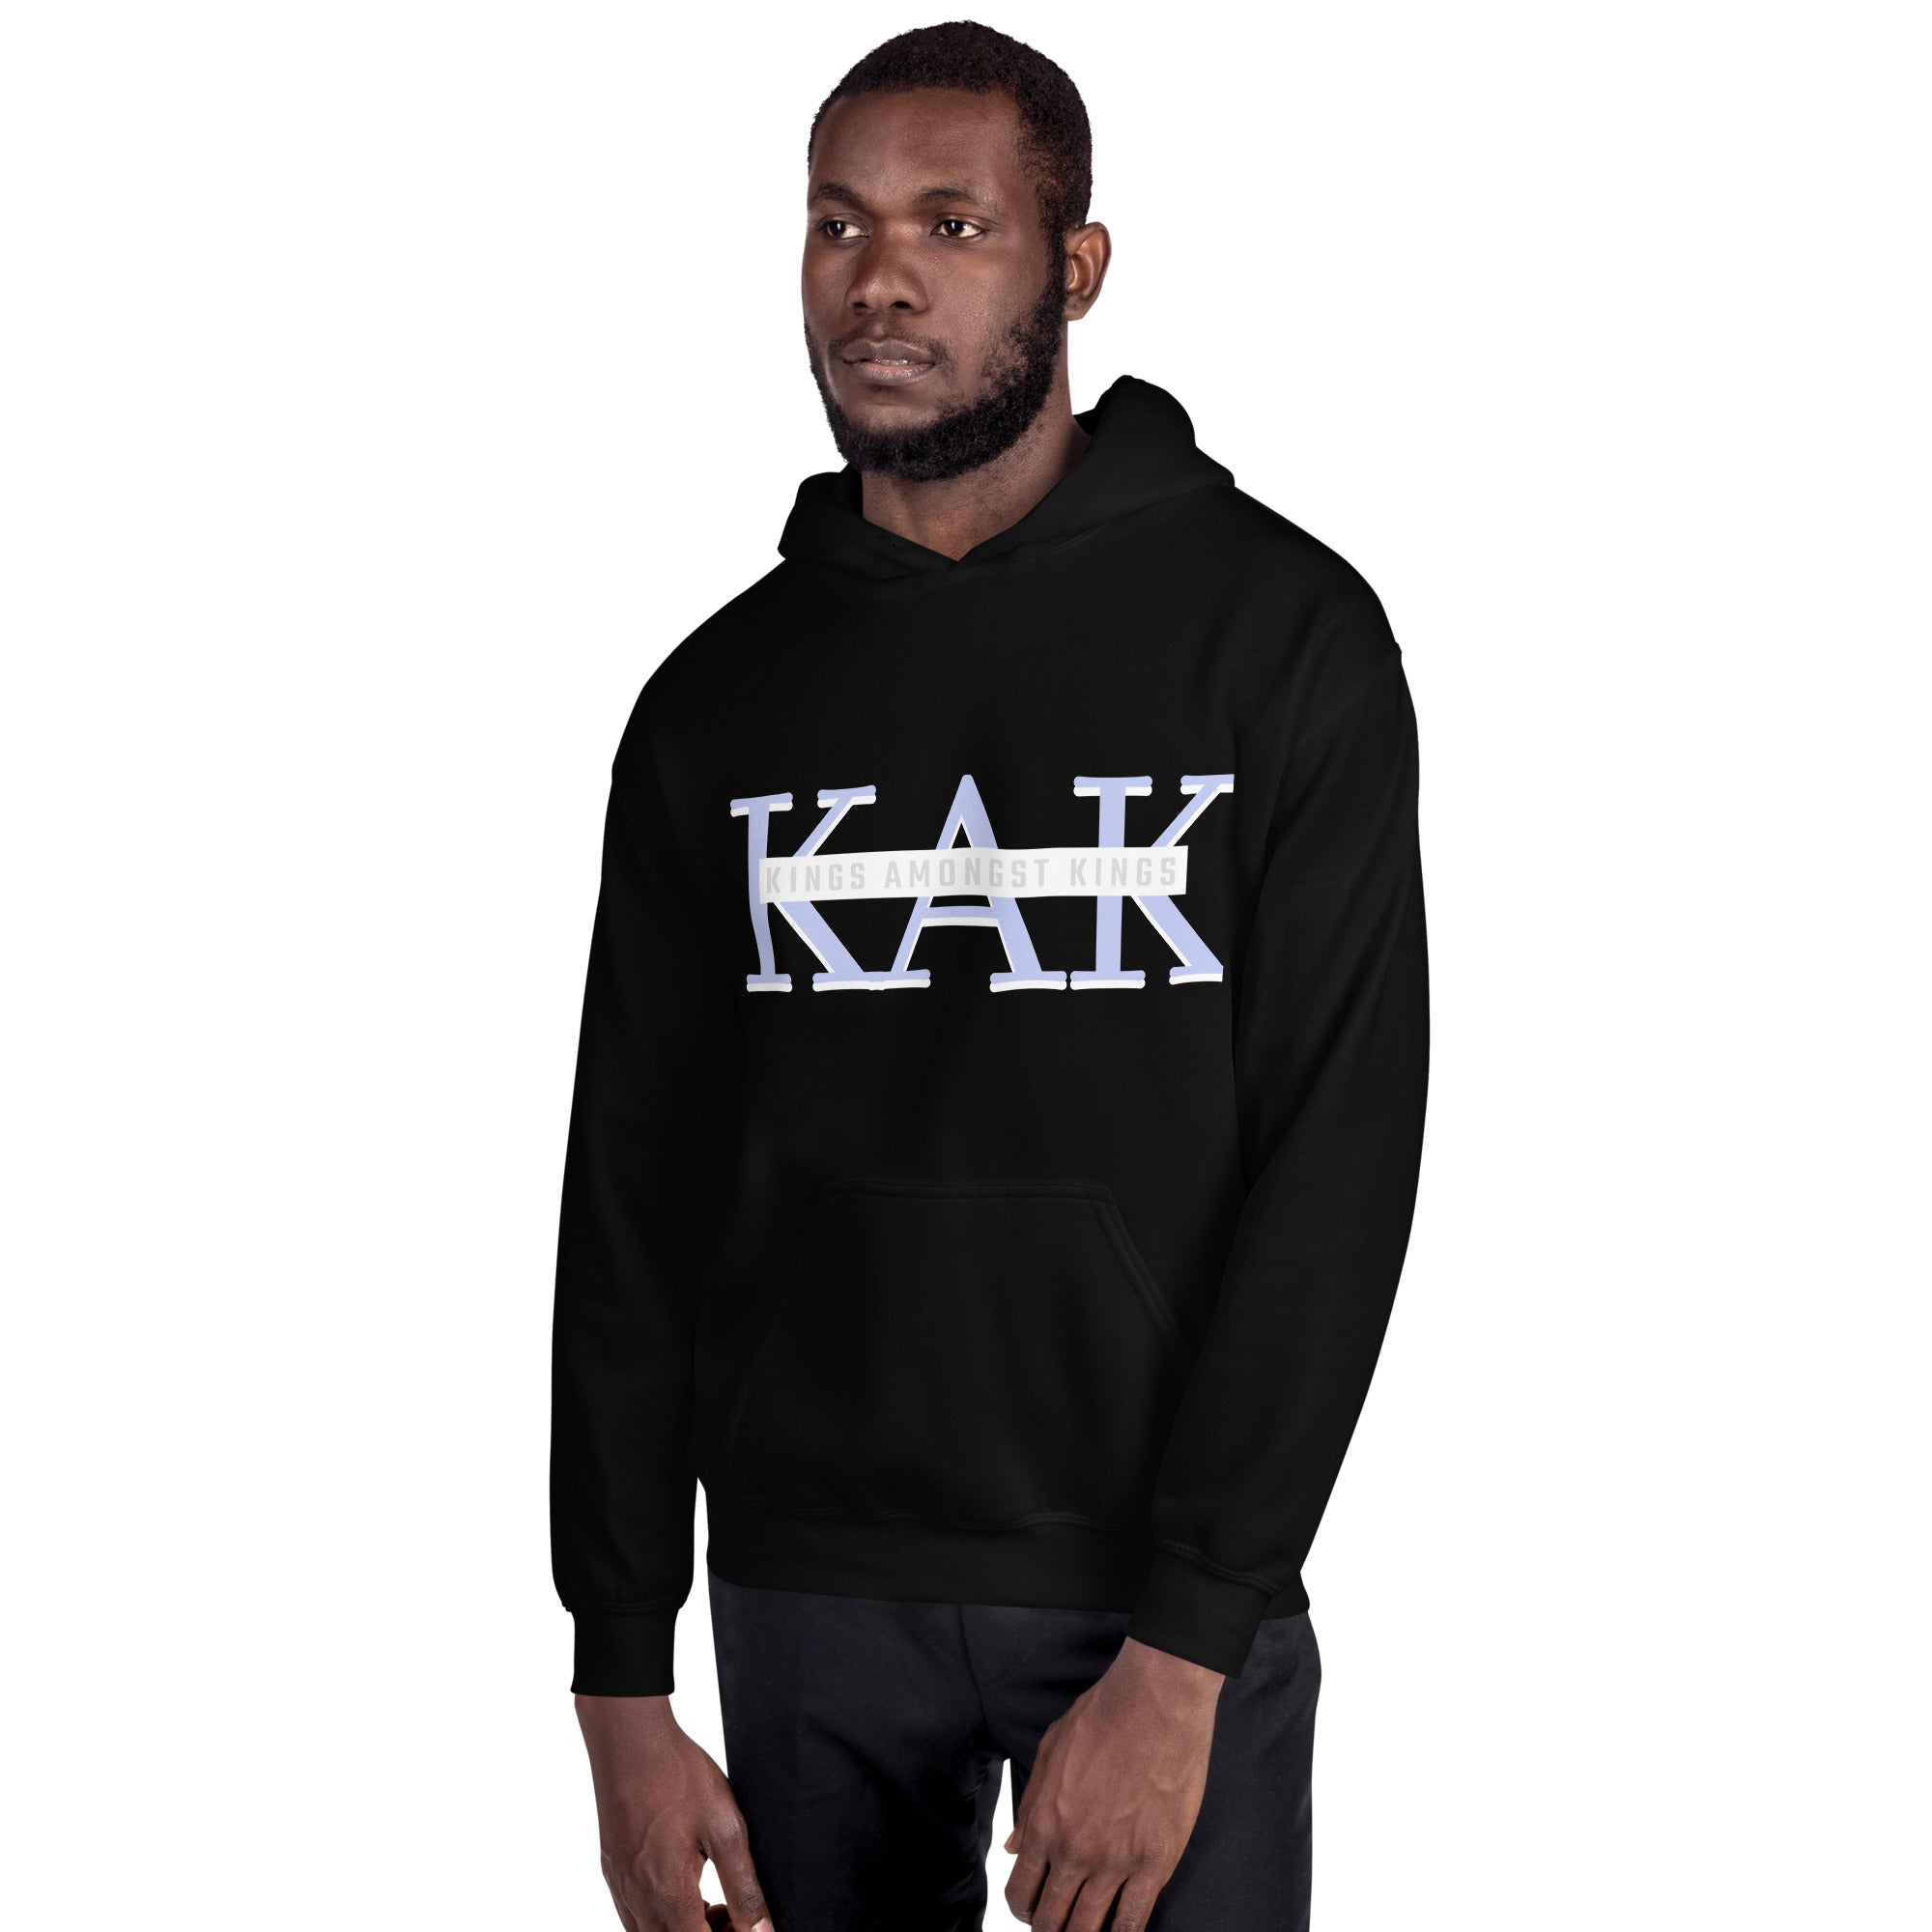 ALL KINGS MUST LIFTUnisex Hoodie - MobbMall